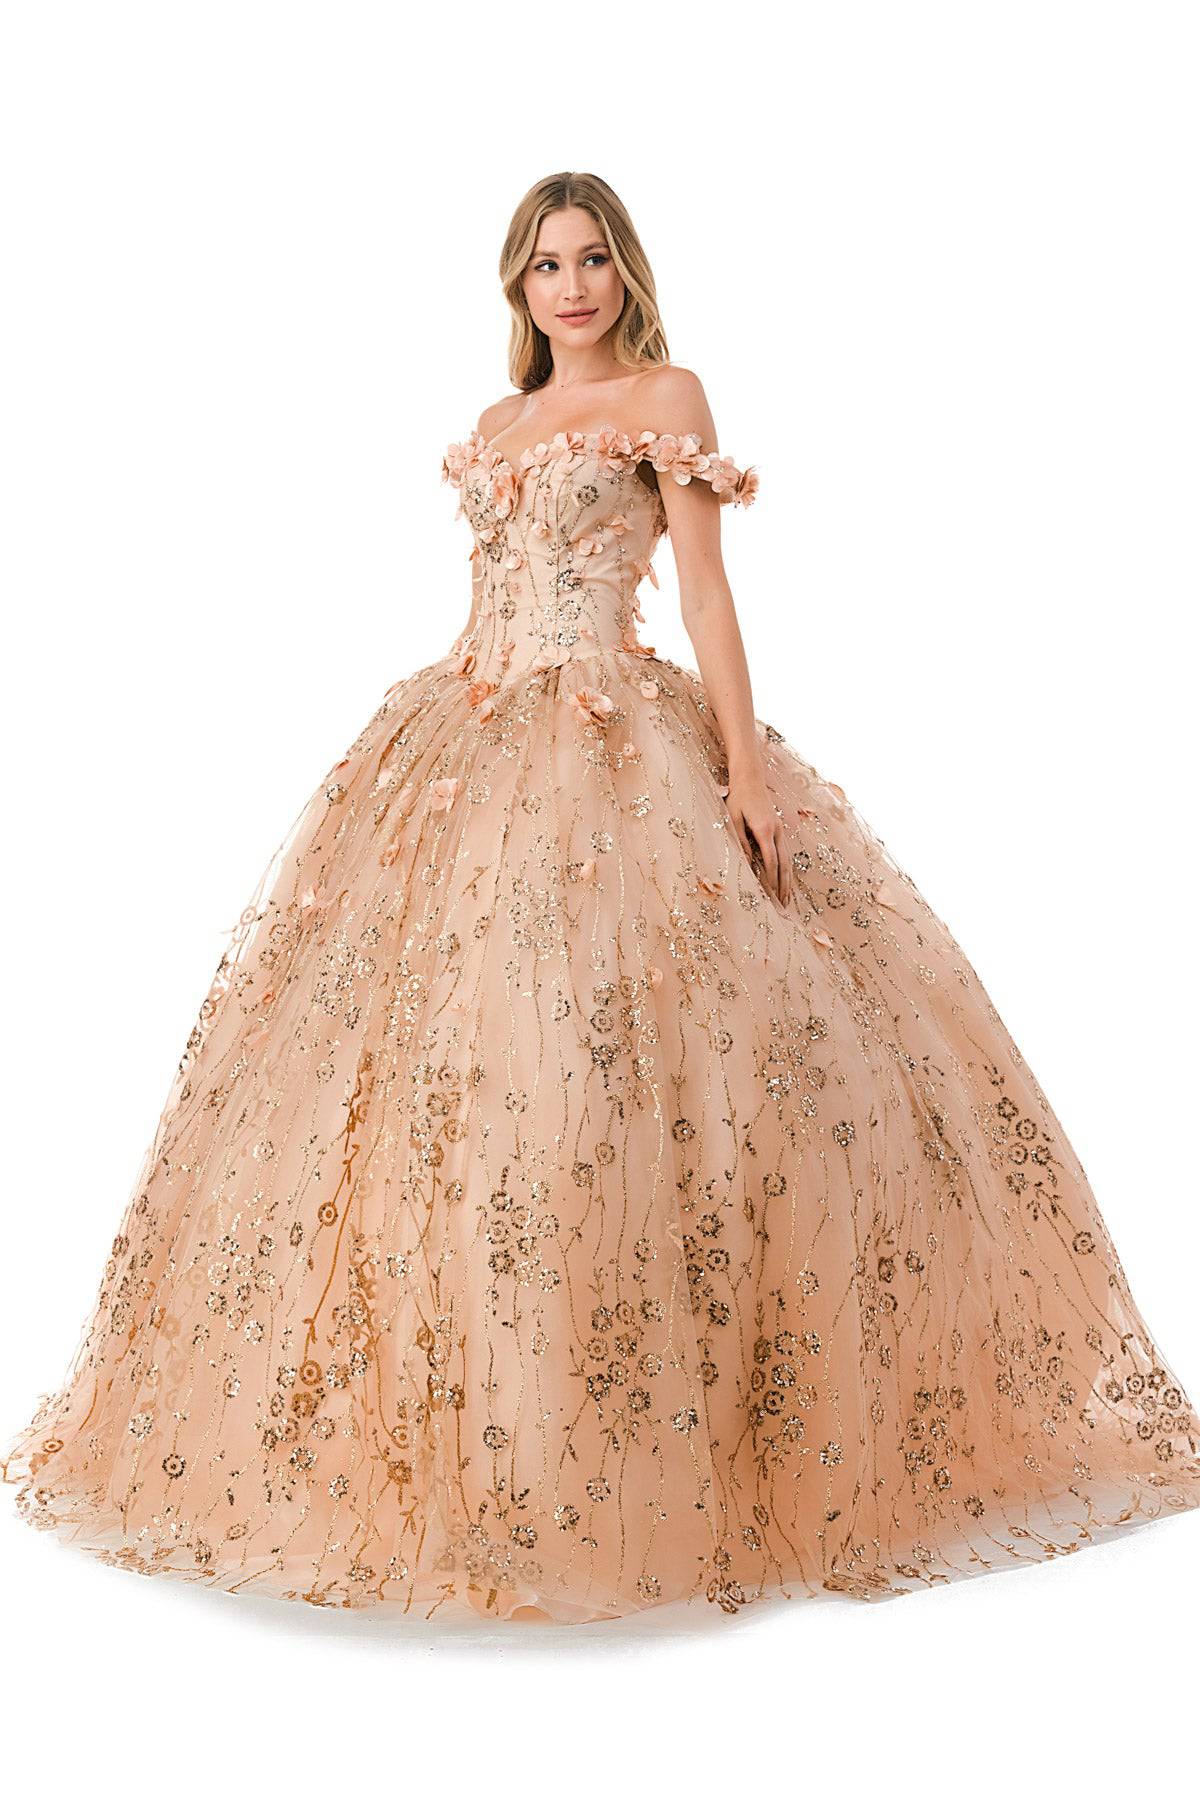 Aspeed L2766A Gorgeous Rose Gold Floral Inspired Quinceanera Dress - NORMA REED